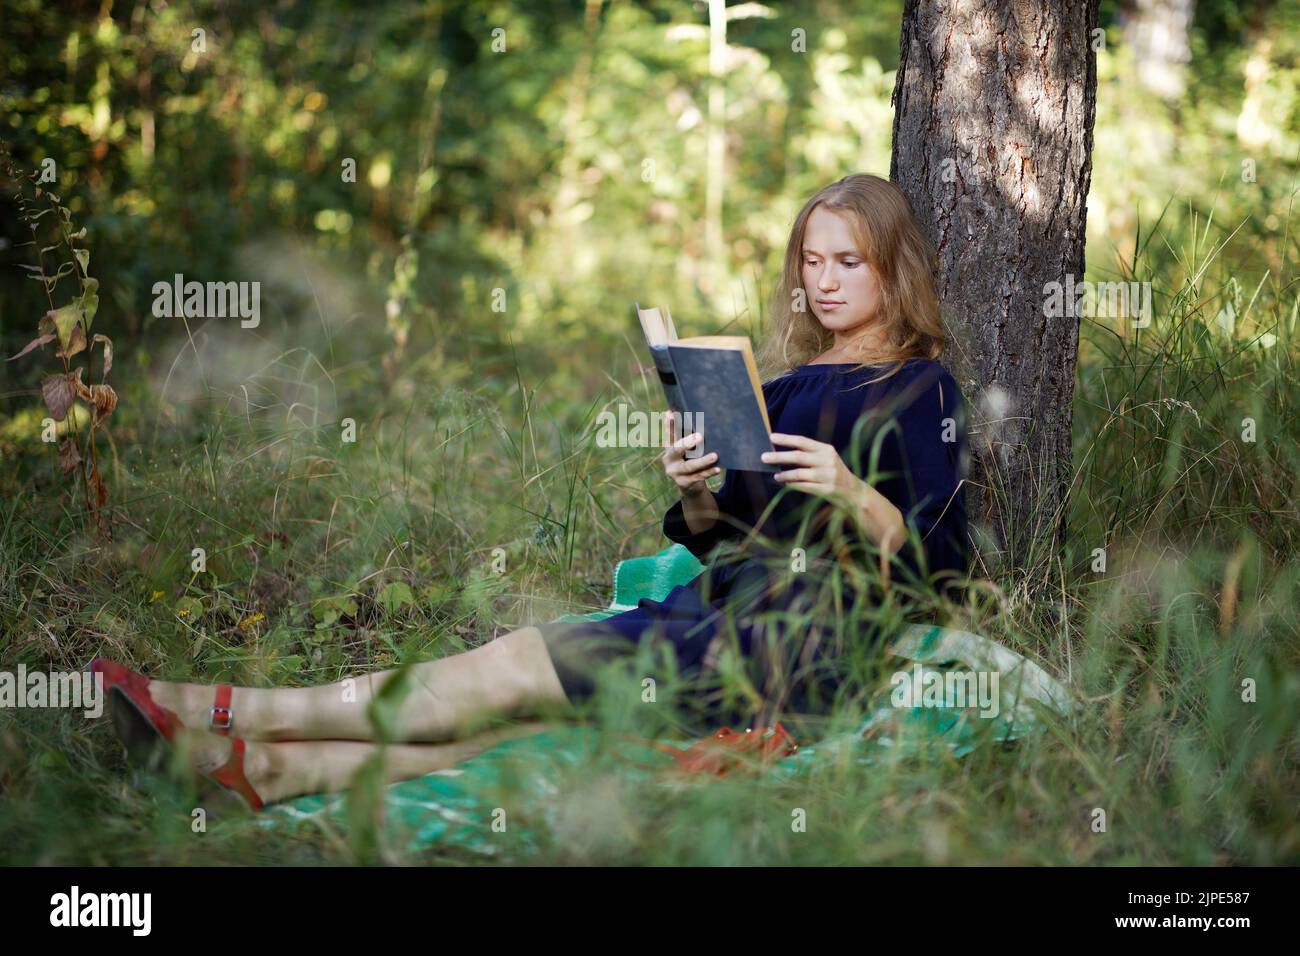 The girl reads a book in a park sitting under a tree. Shallow focus. Stock Photo